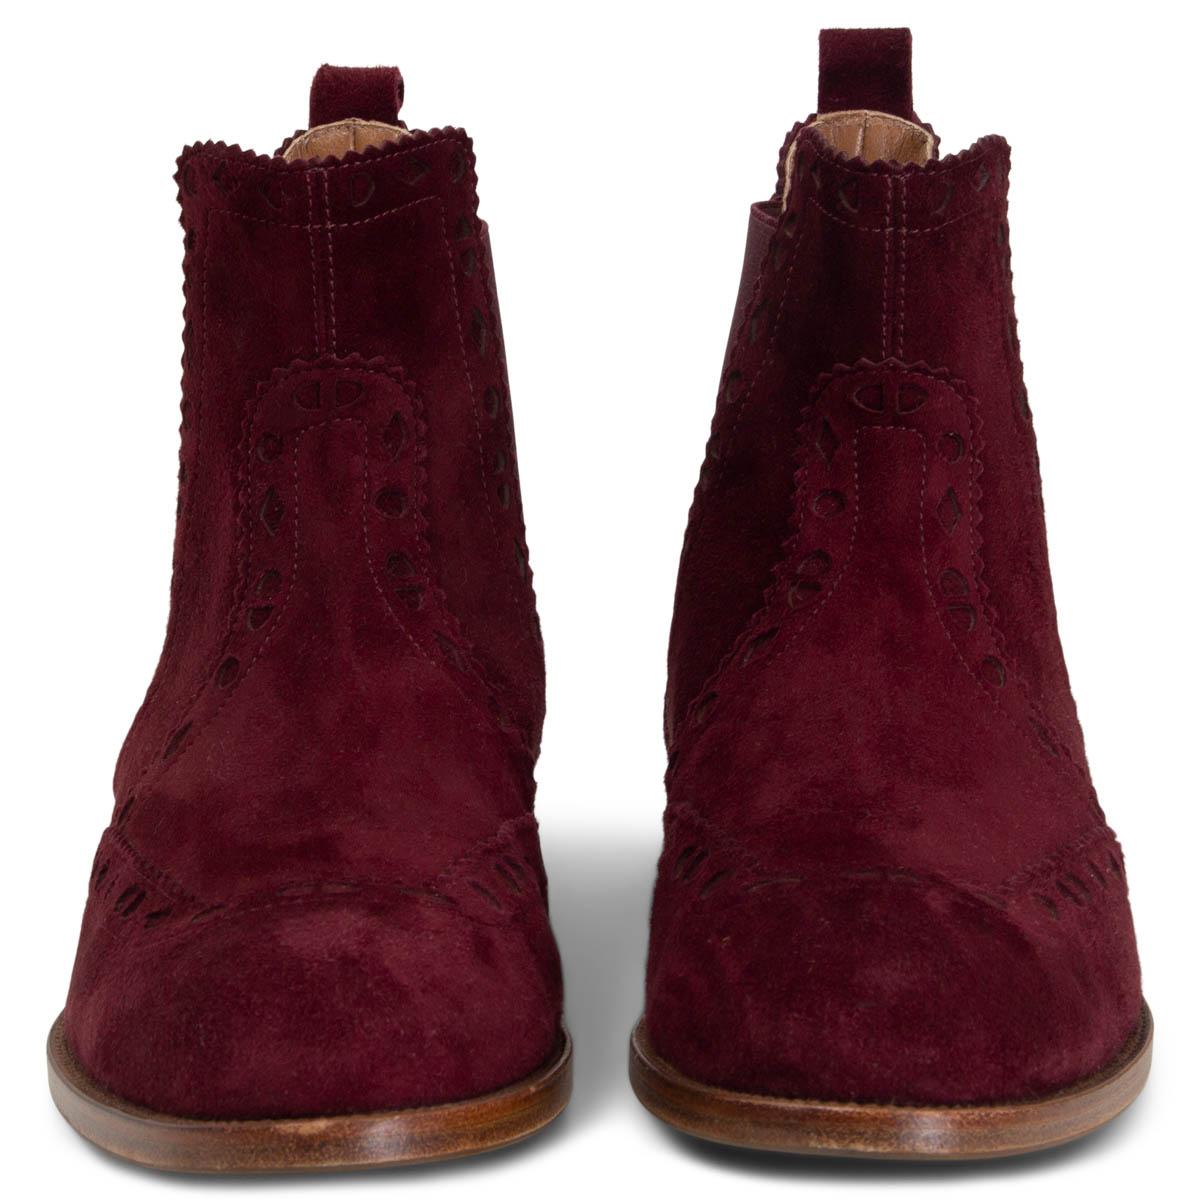 100% authentic Hermès Brighton flat brogue ankle boots in burgundy suede. Elastic band on the sides. Have been worn and are in excellent condition. Rubber sole got added. Come with dust bag. 

Measurements
Imprinted Size	39
Shoe Size	39
Inside